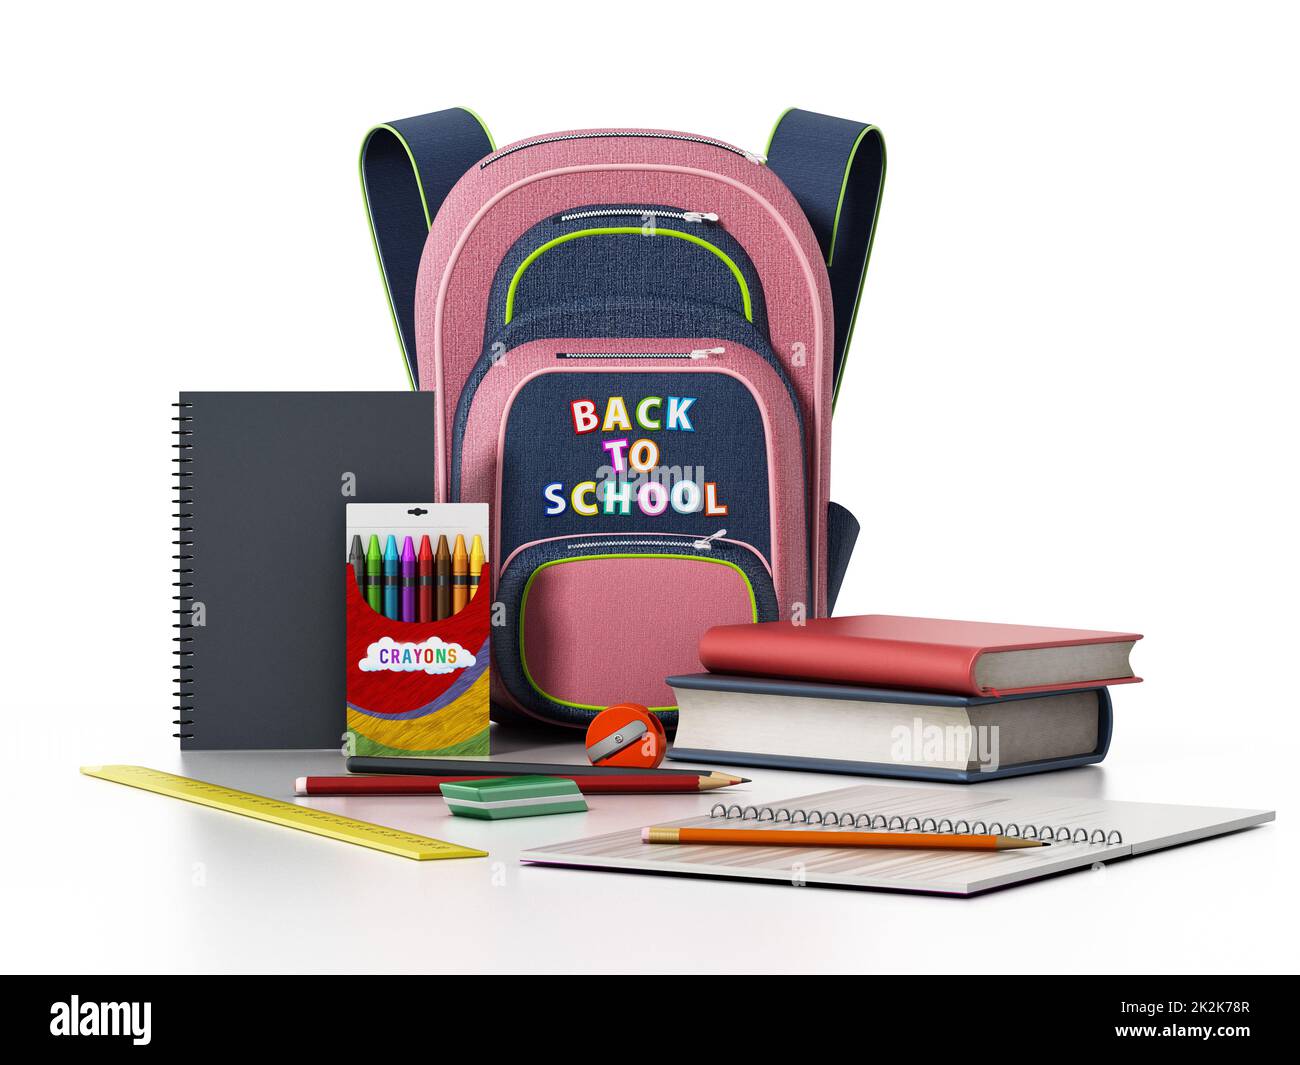 School backpack and objects isolated on white background. 3D illustration Stock Photo